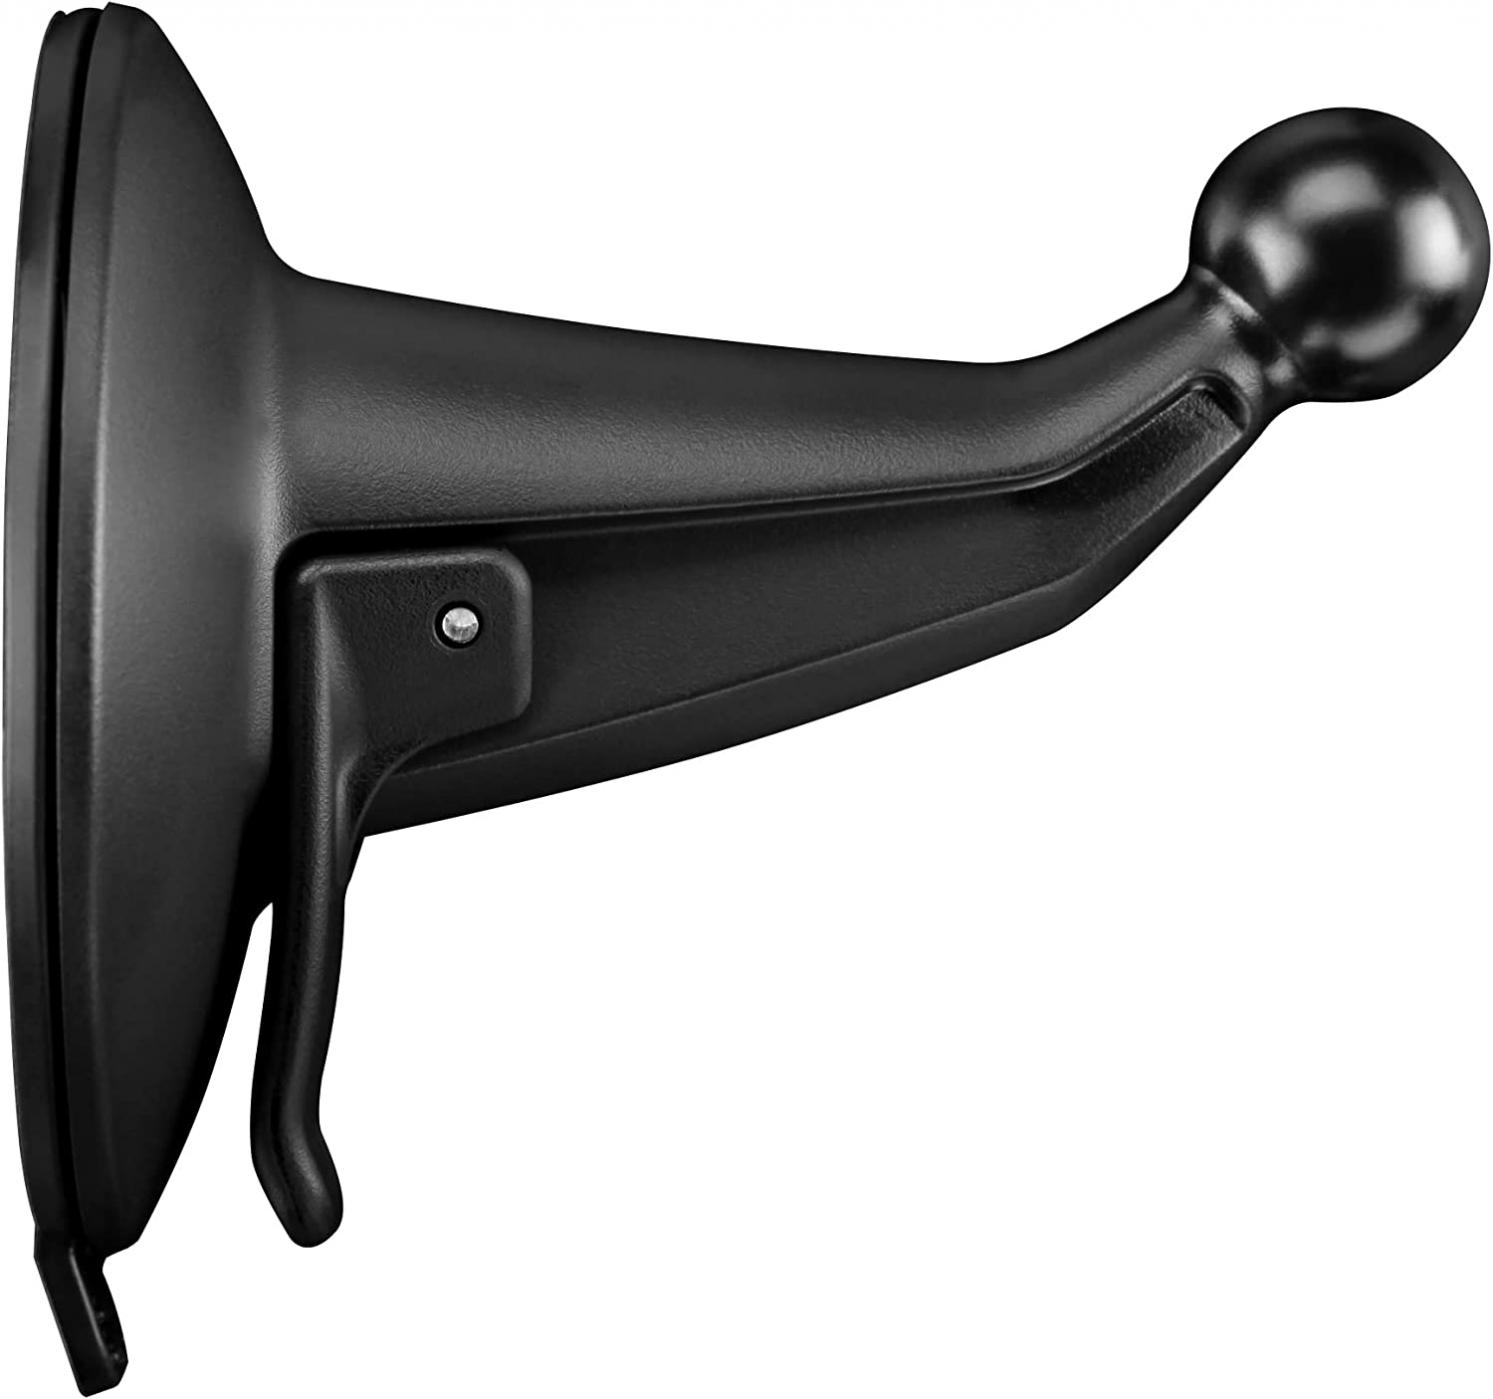 Garmin 7-Inch Suction Cup without Unit Mount